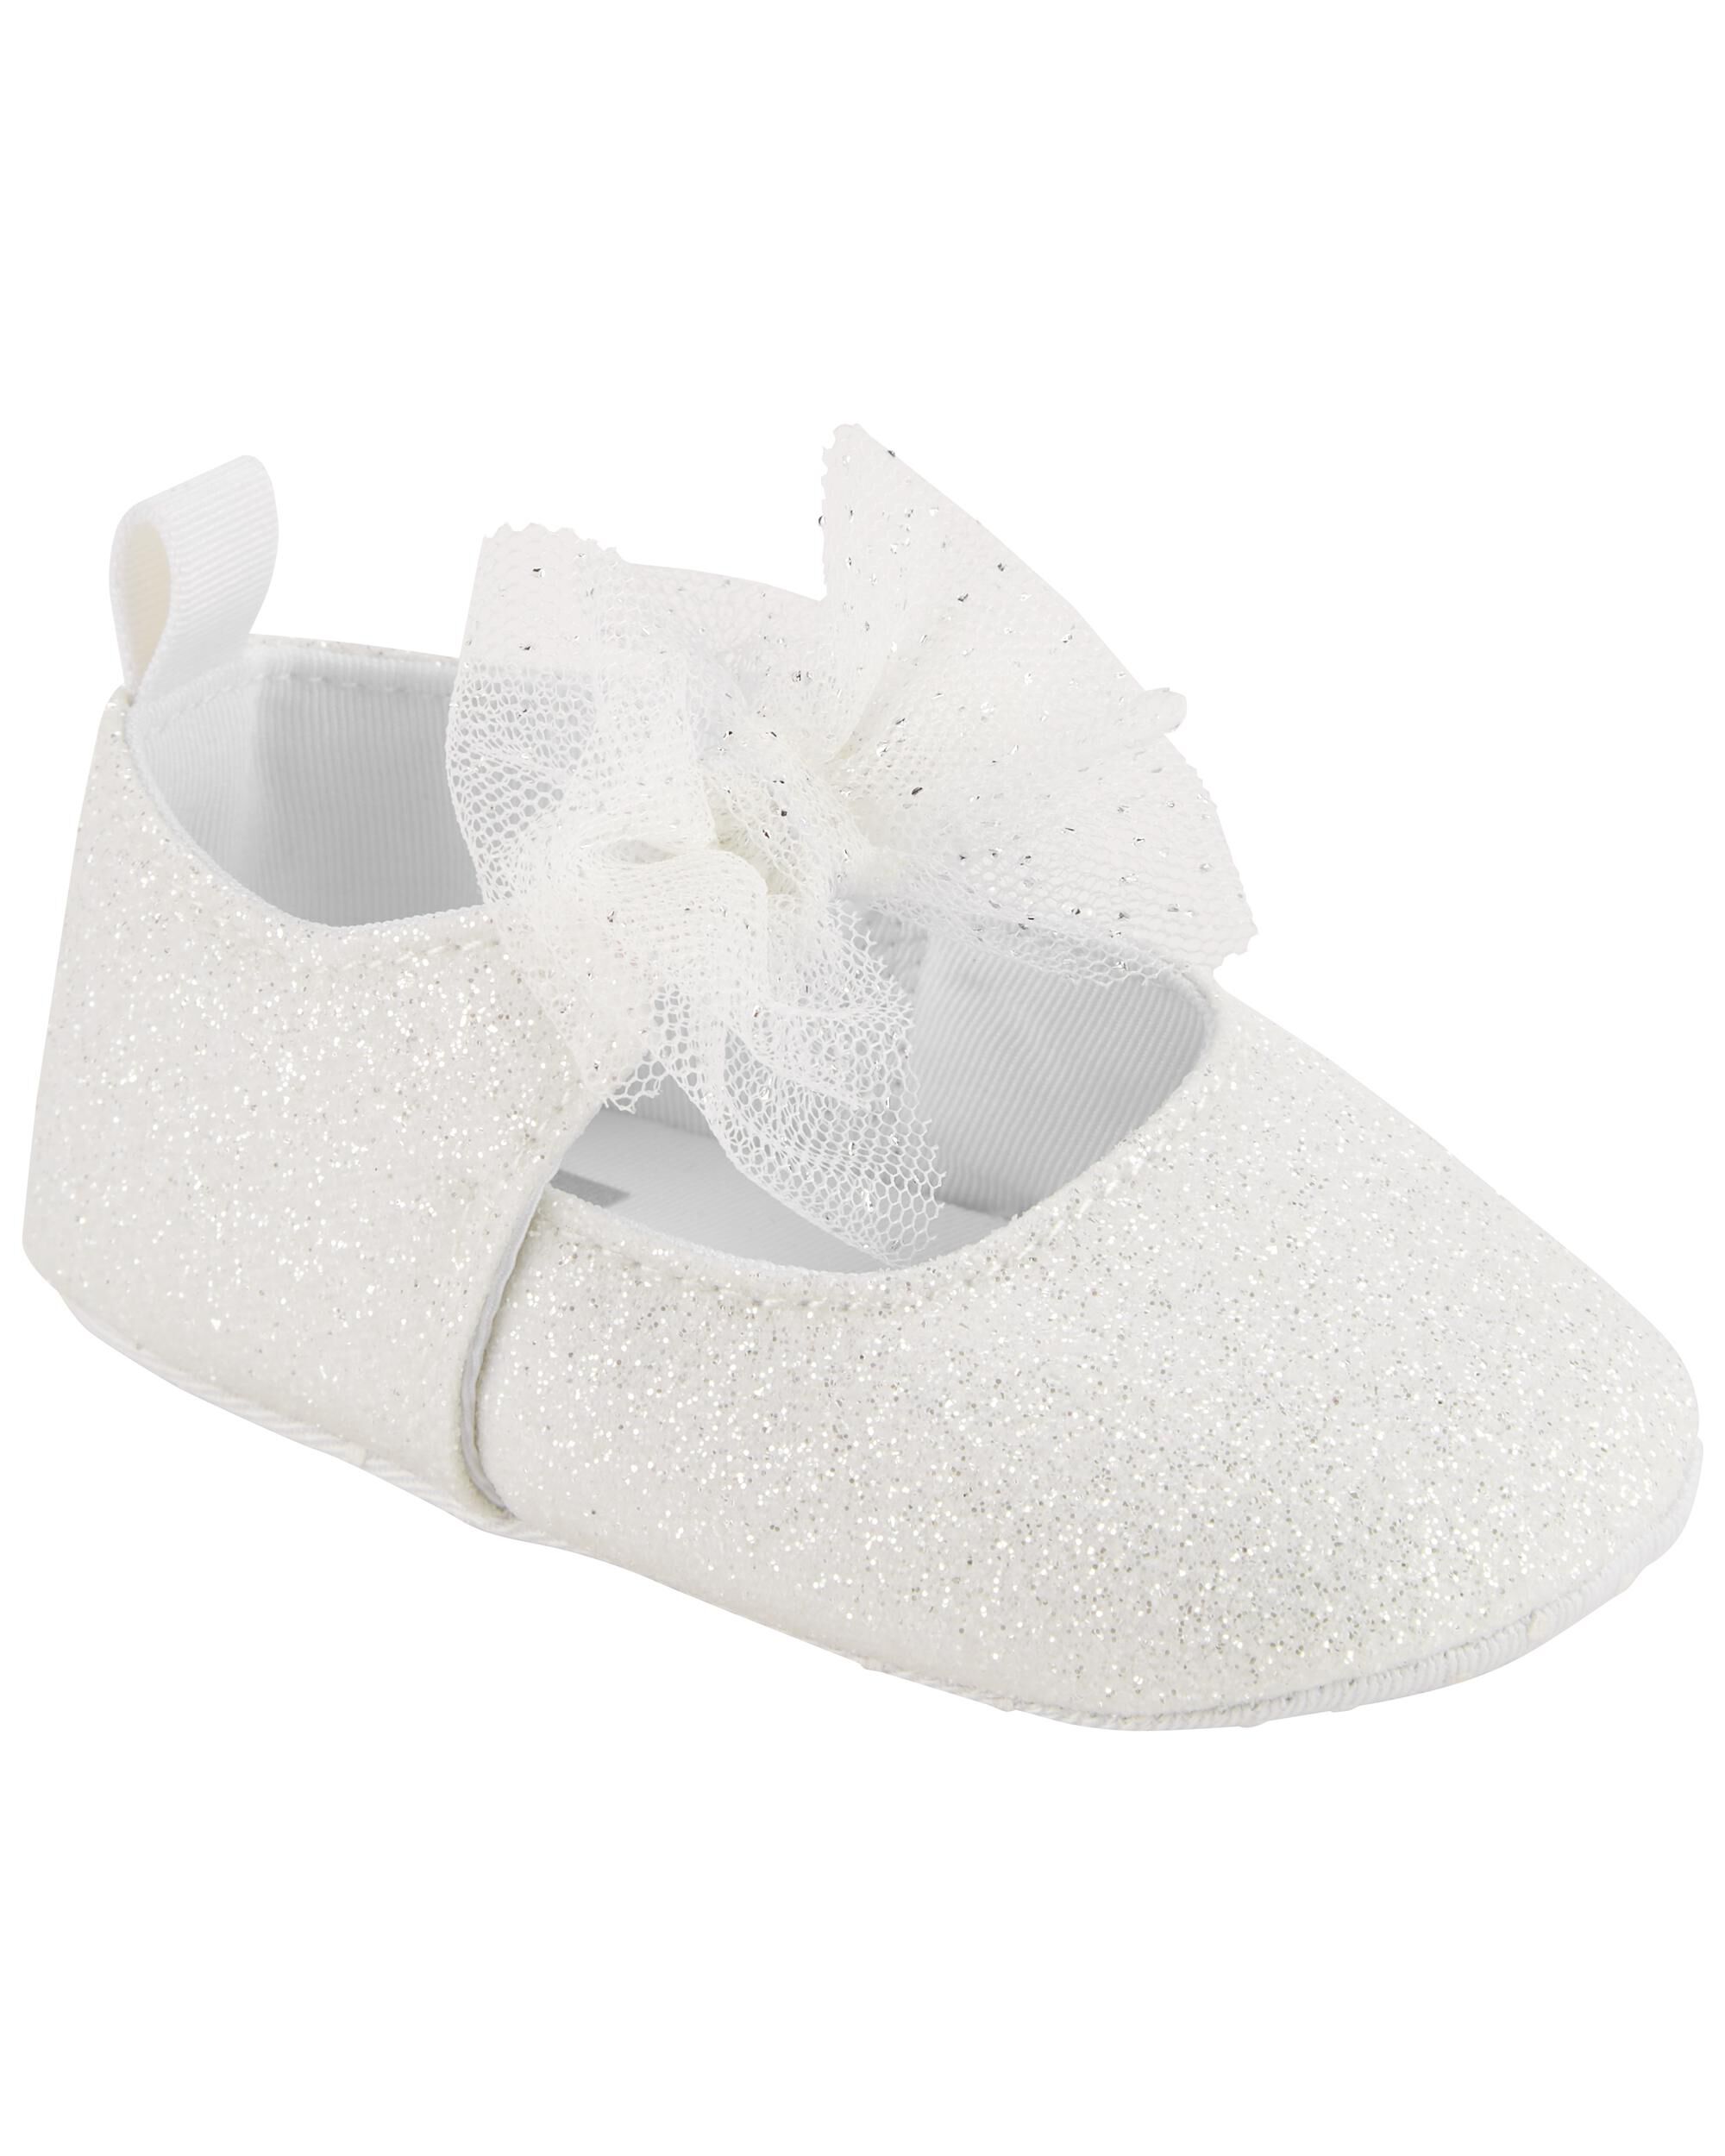 Carters Mary Jane Baby Shoes